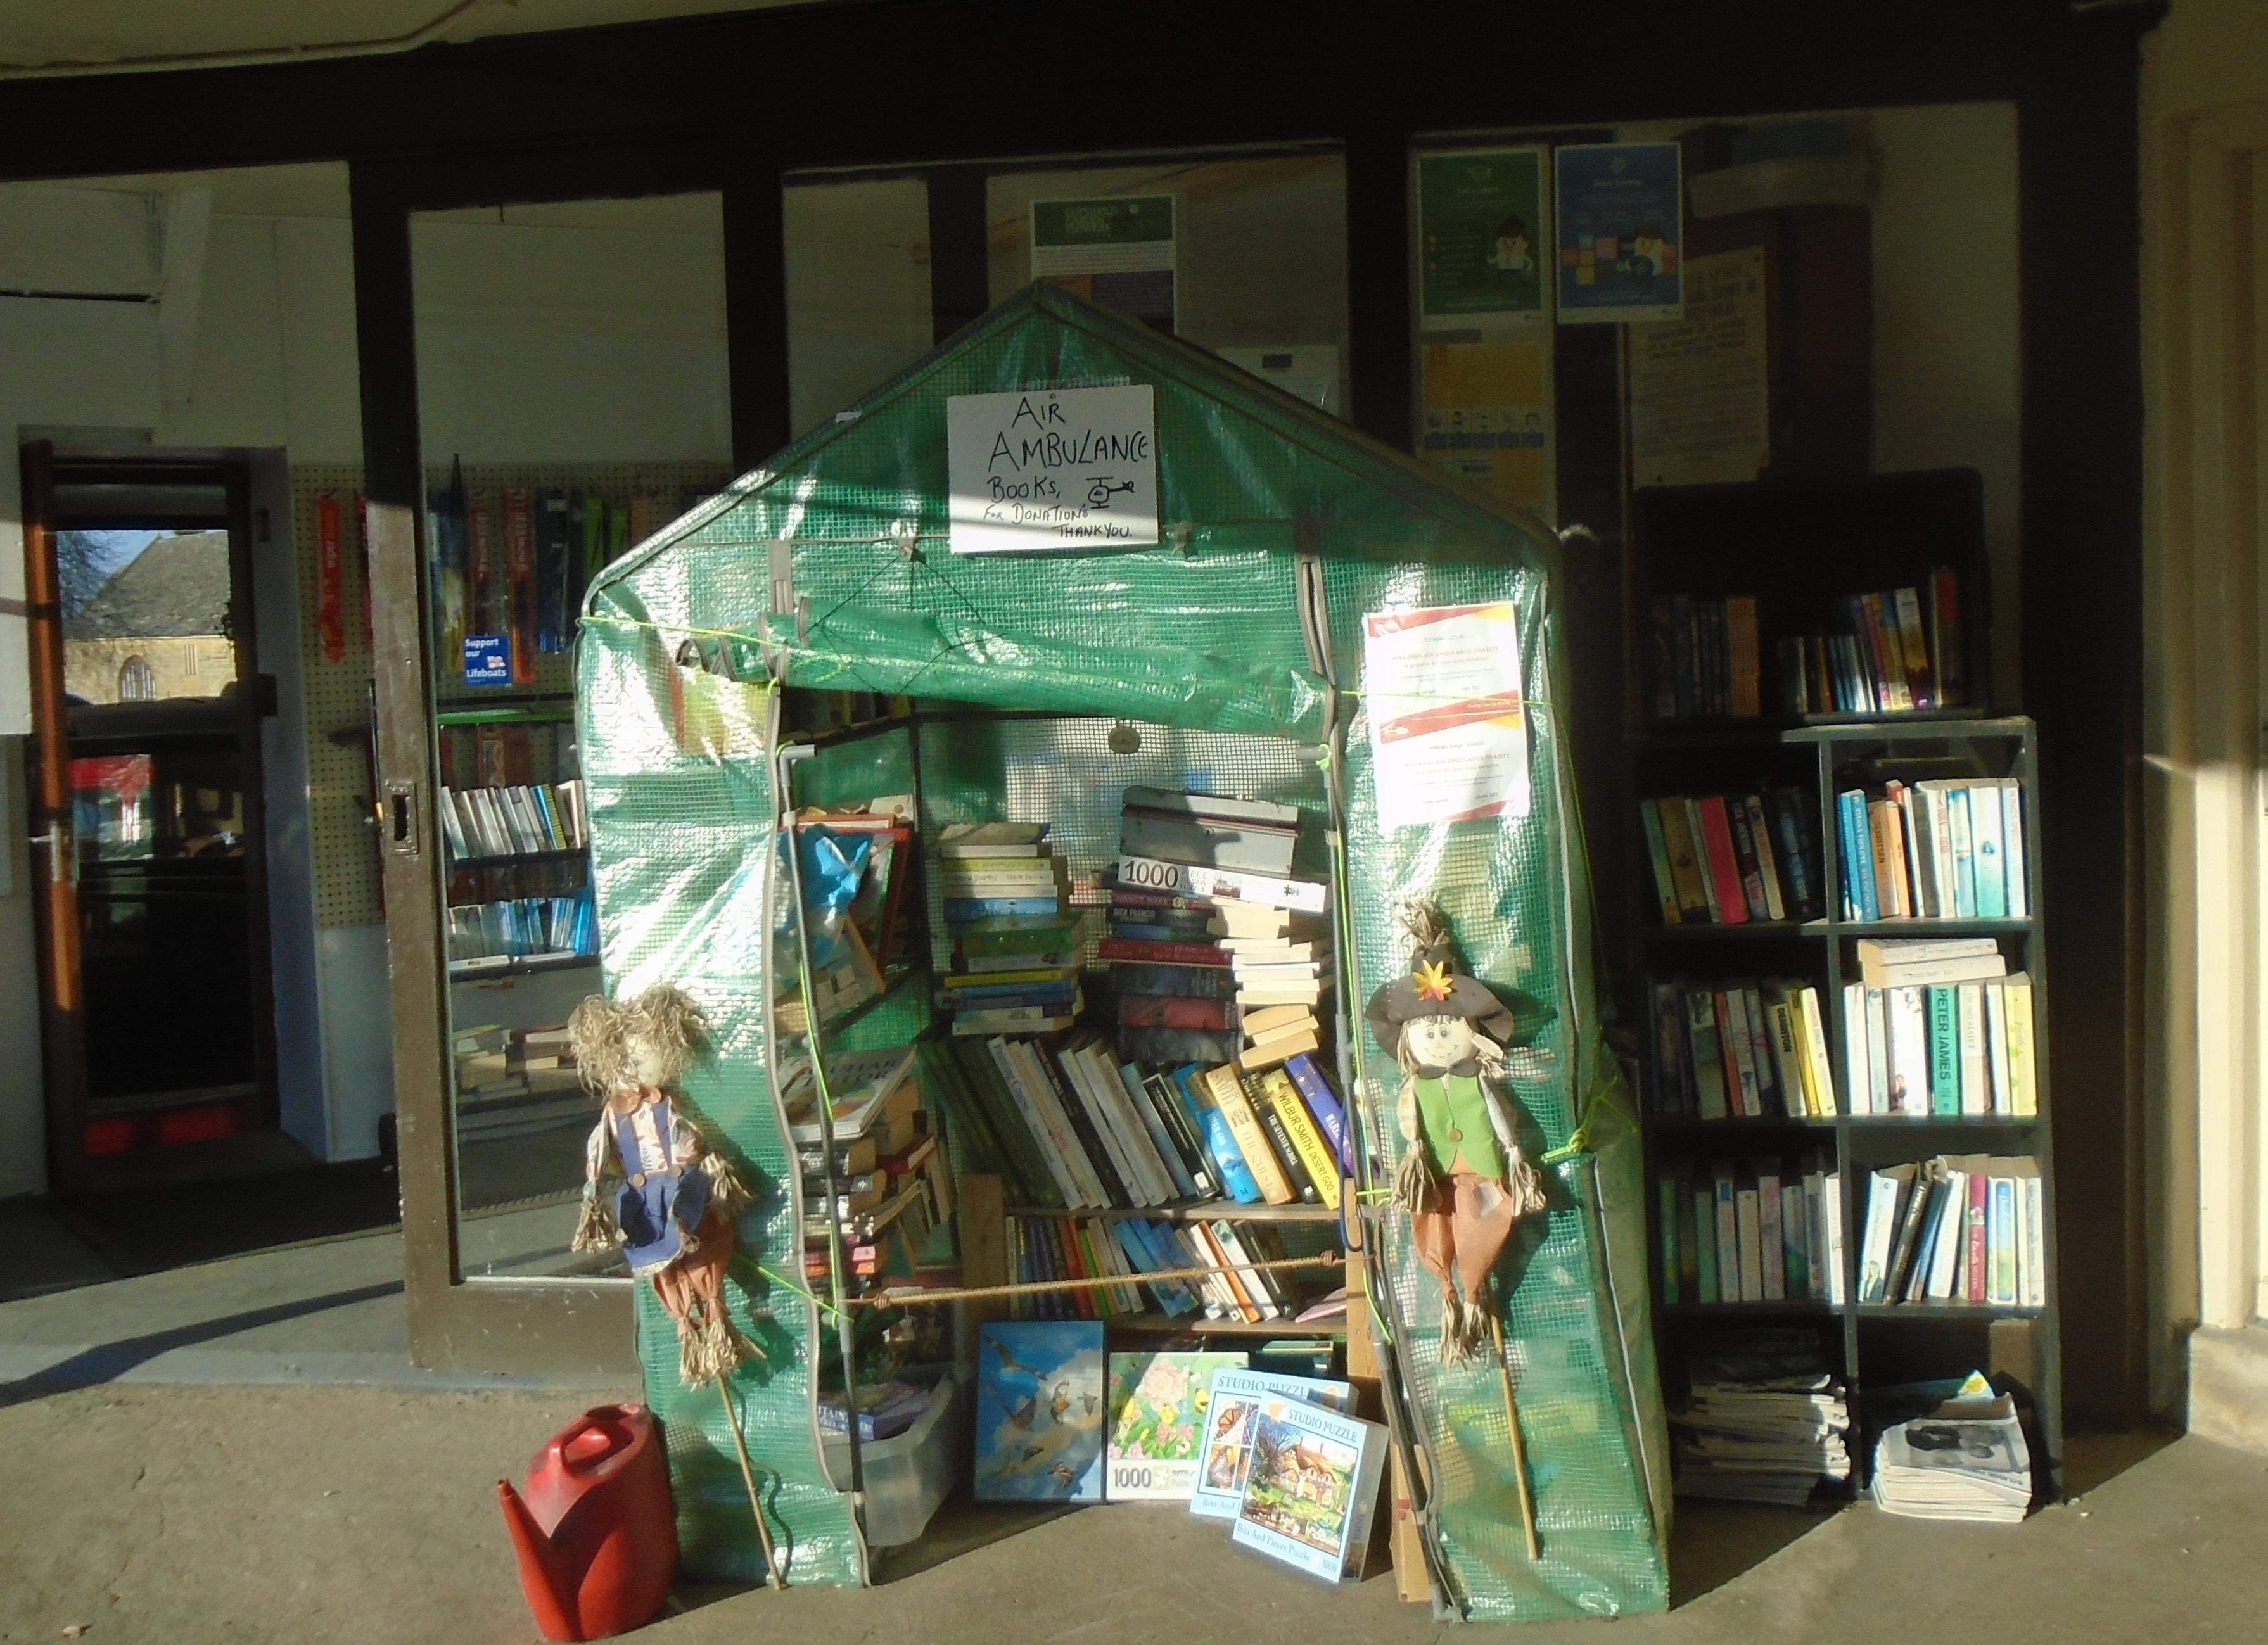 Willersey Garage sells donated books for charity.